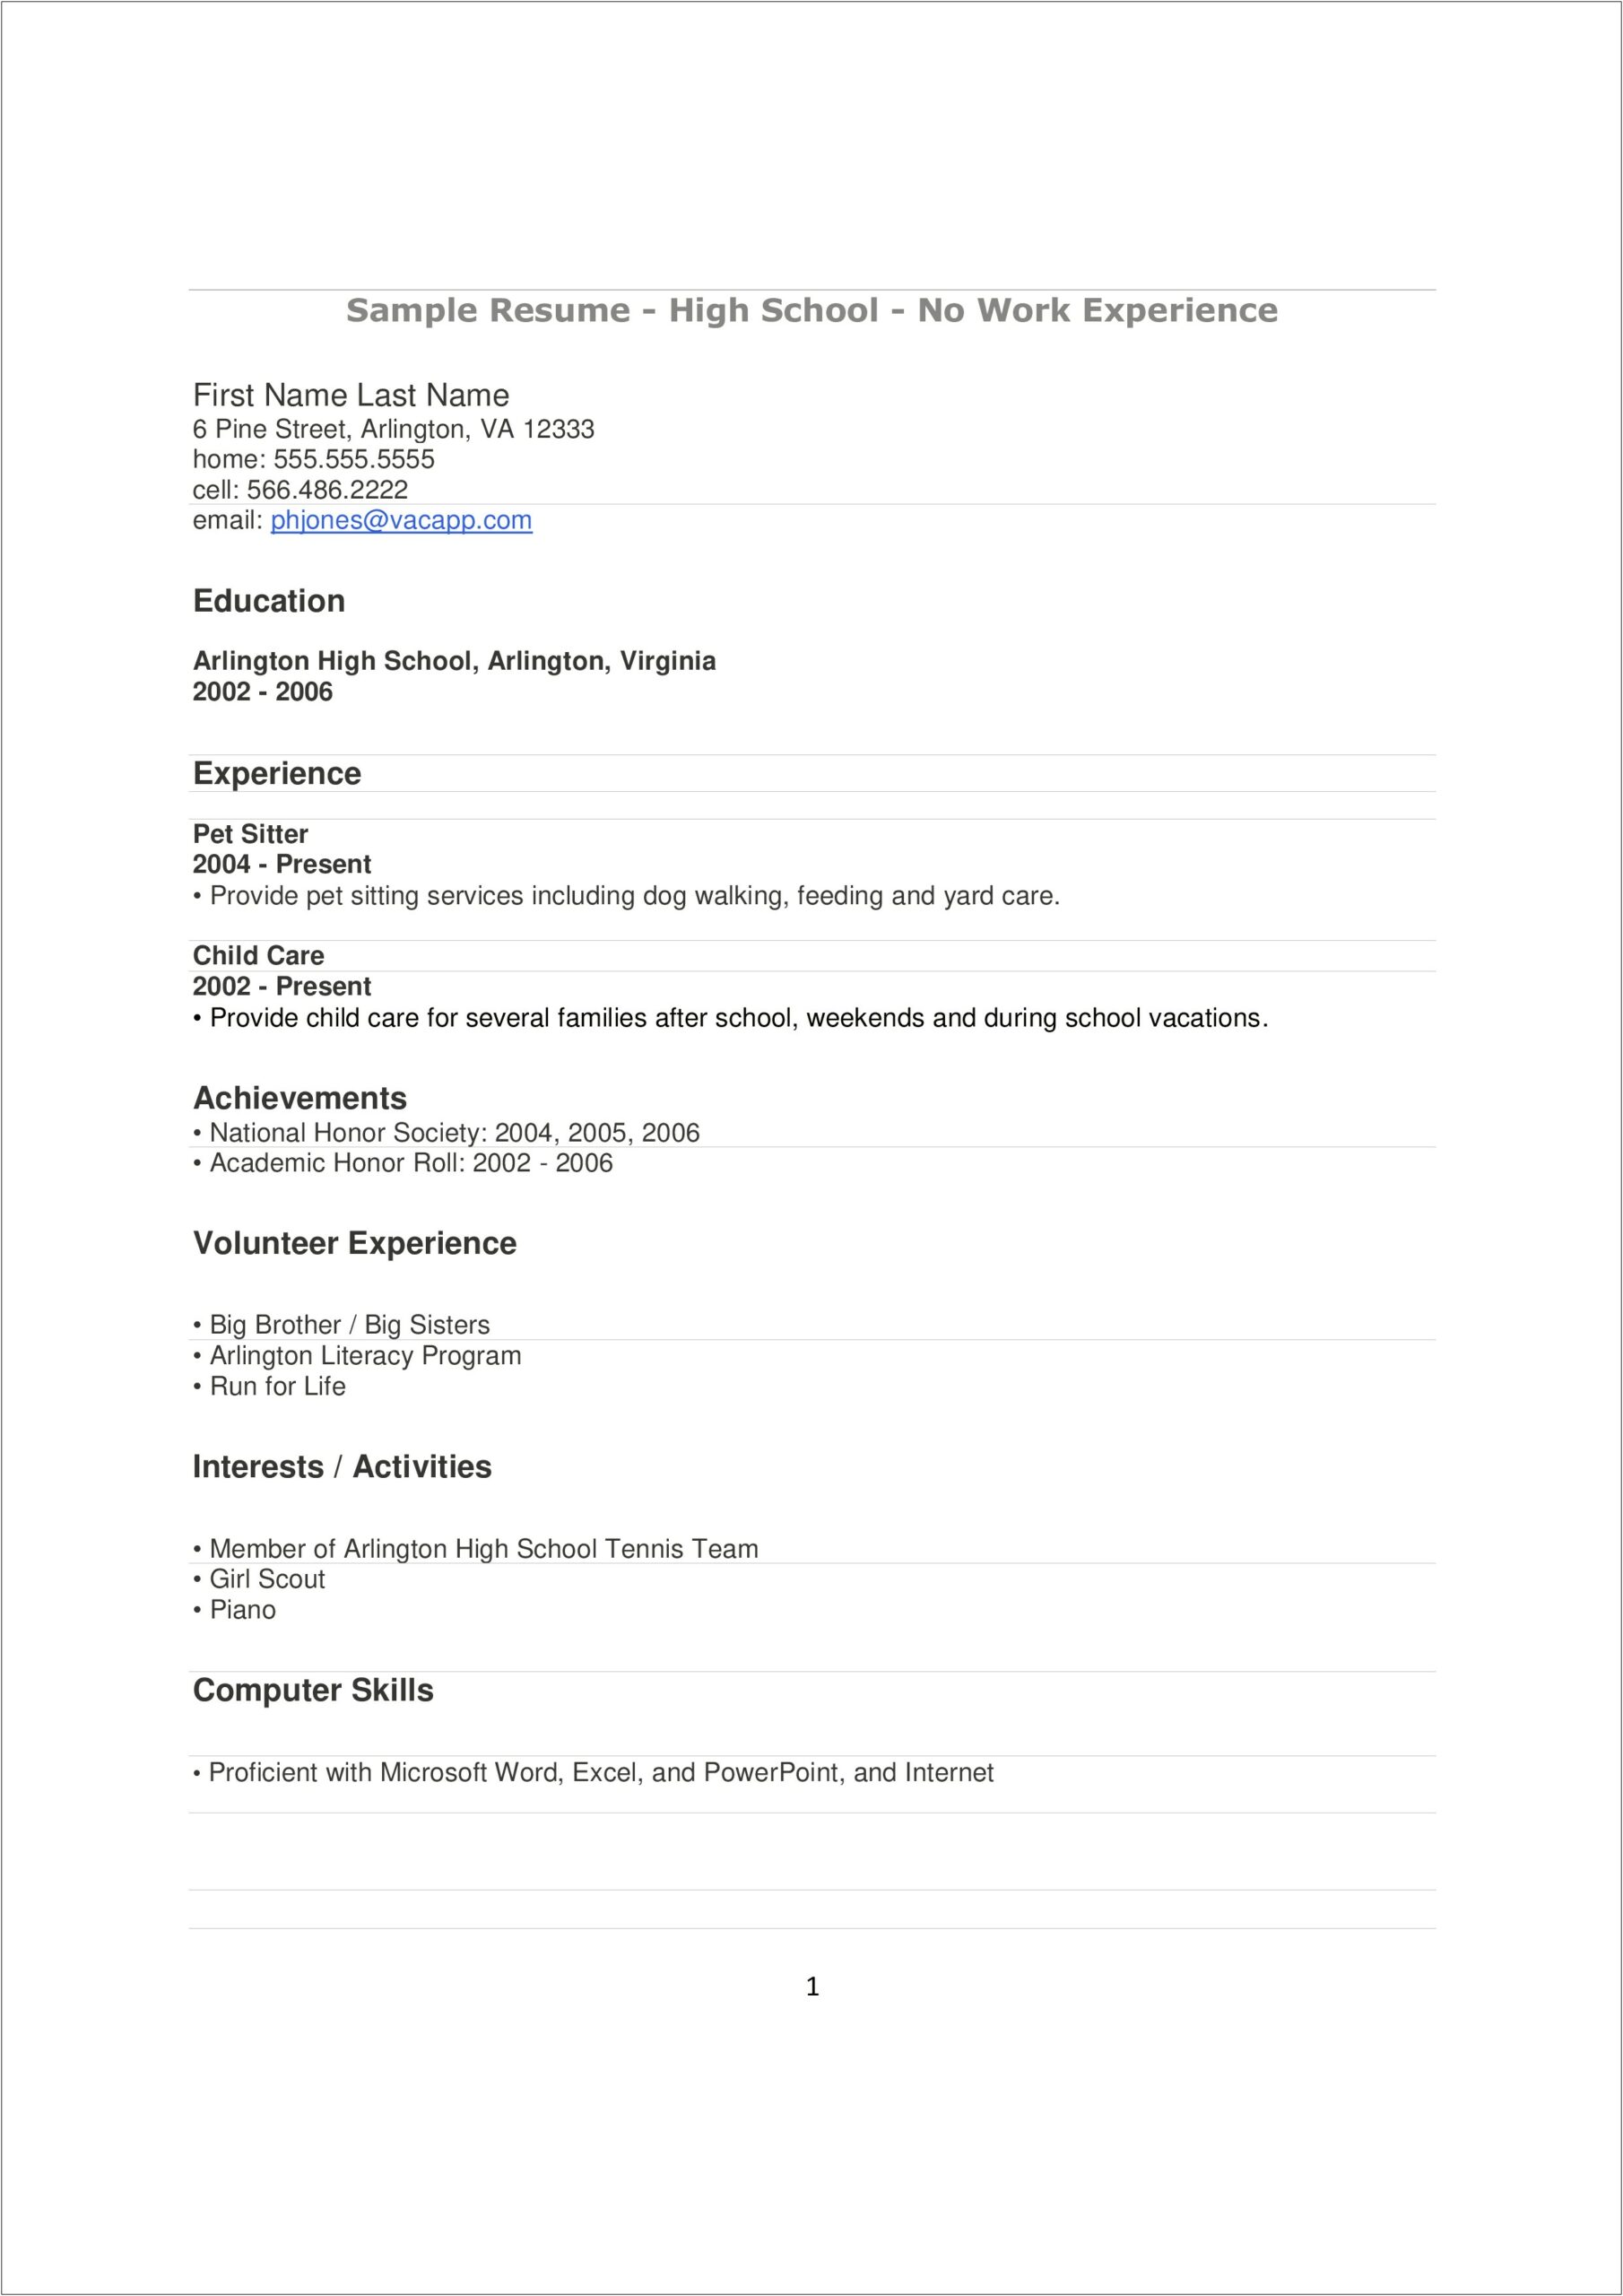 Resume For High Schooler No Work Experience